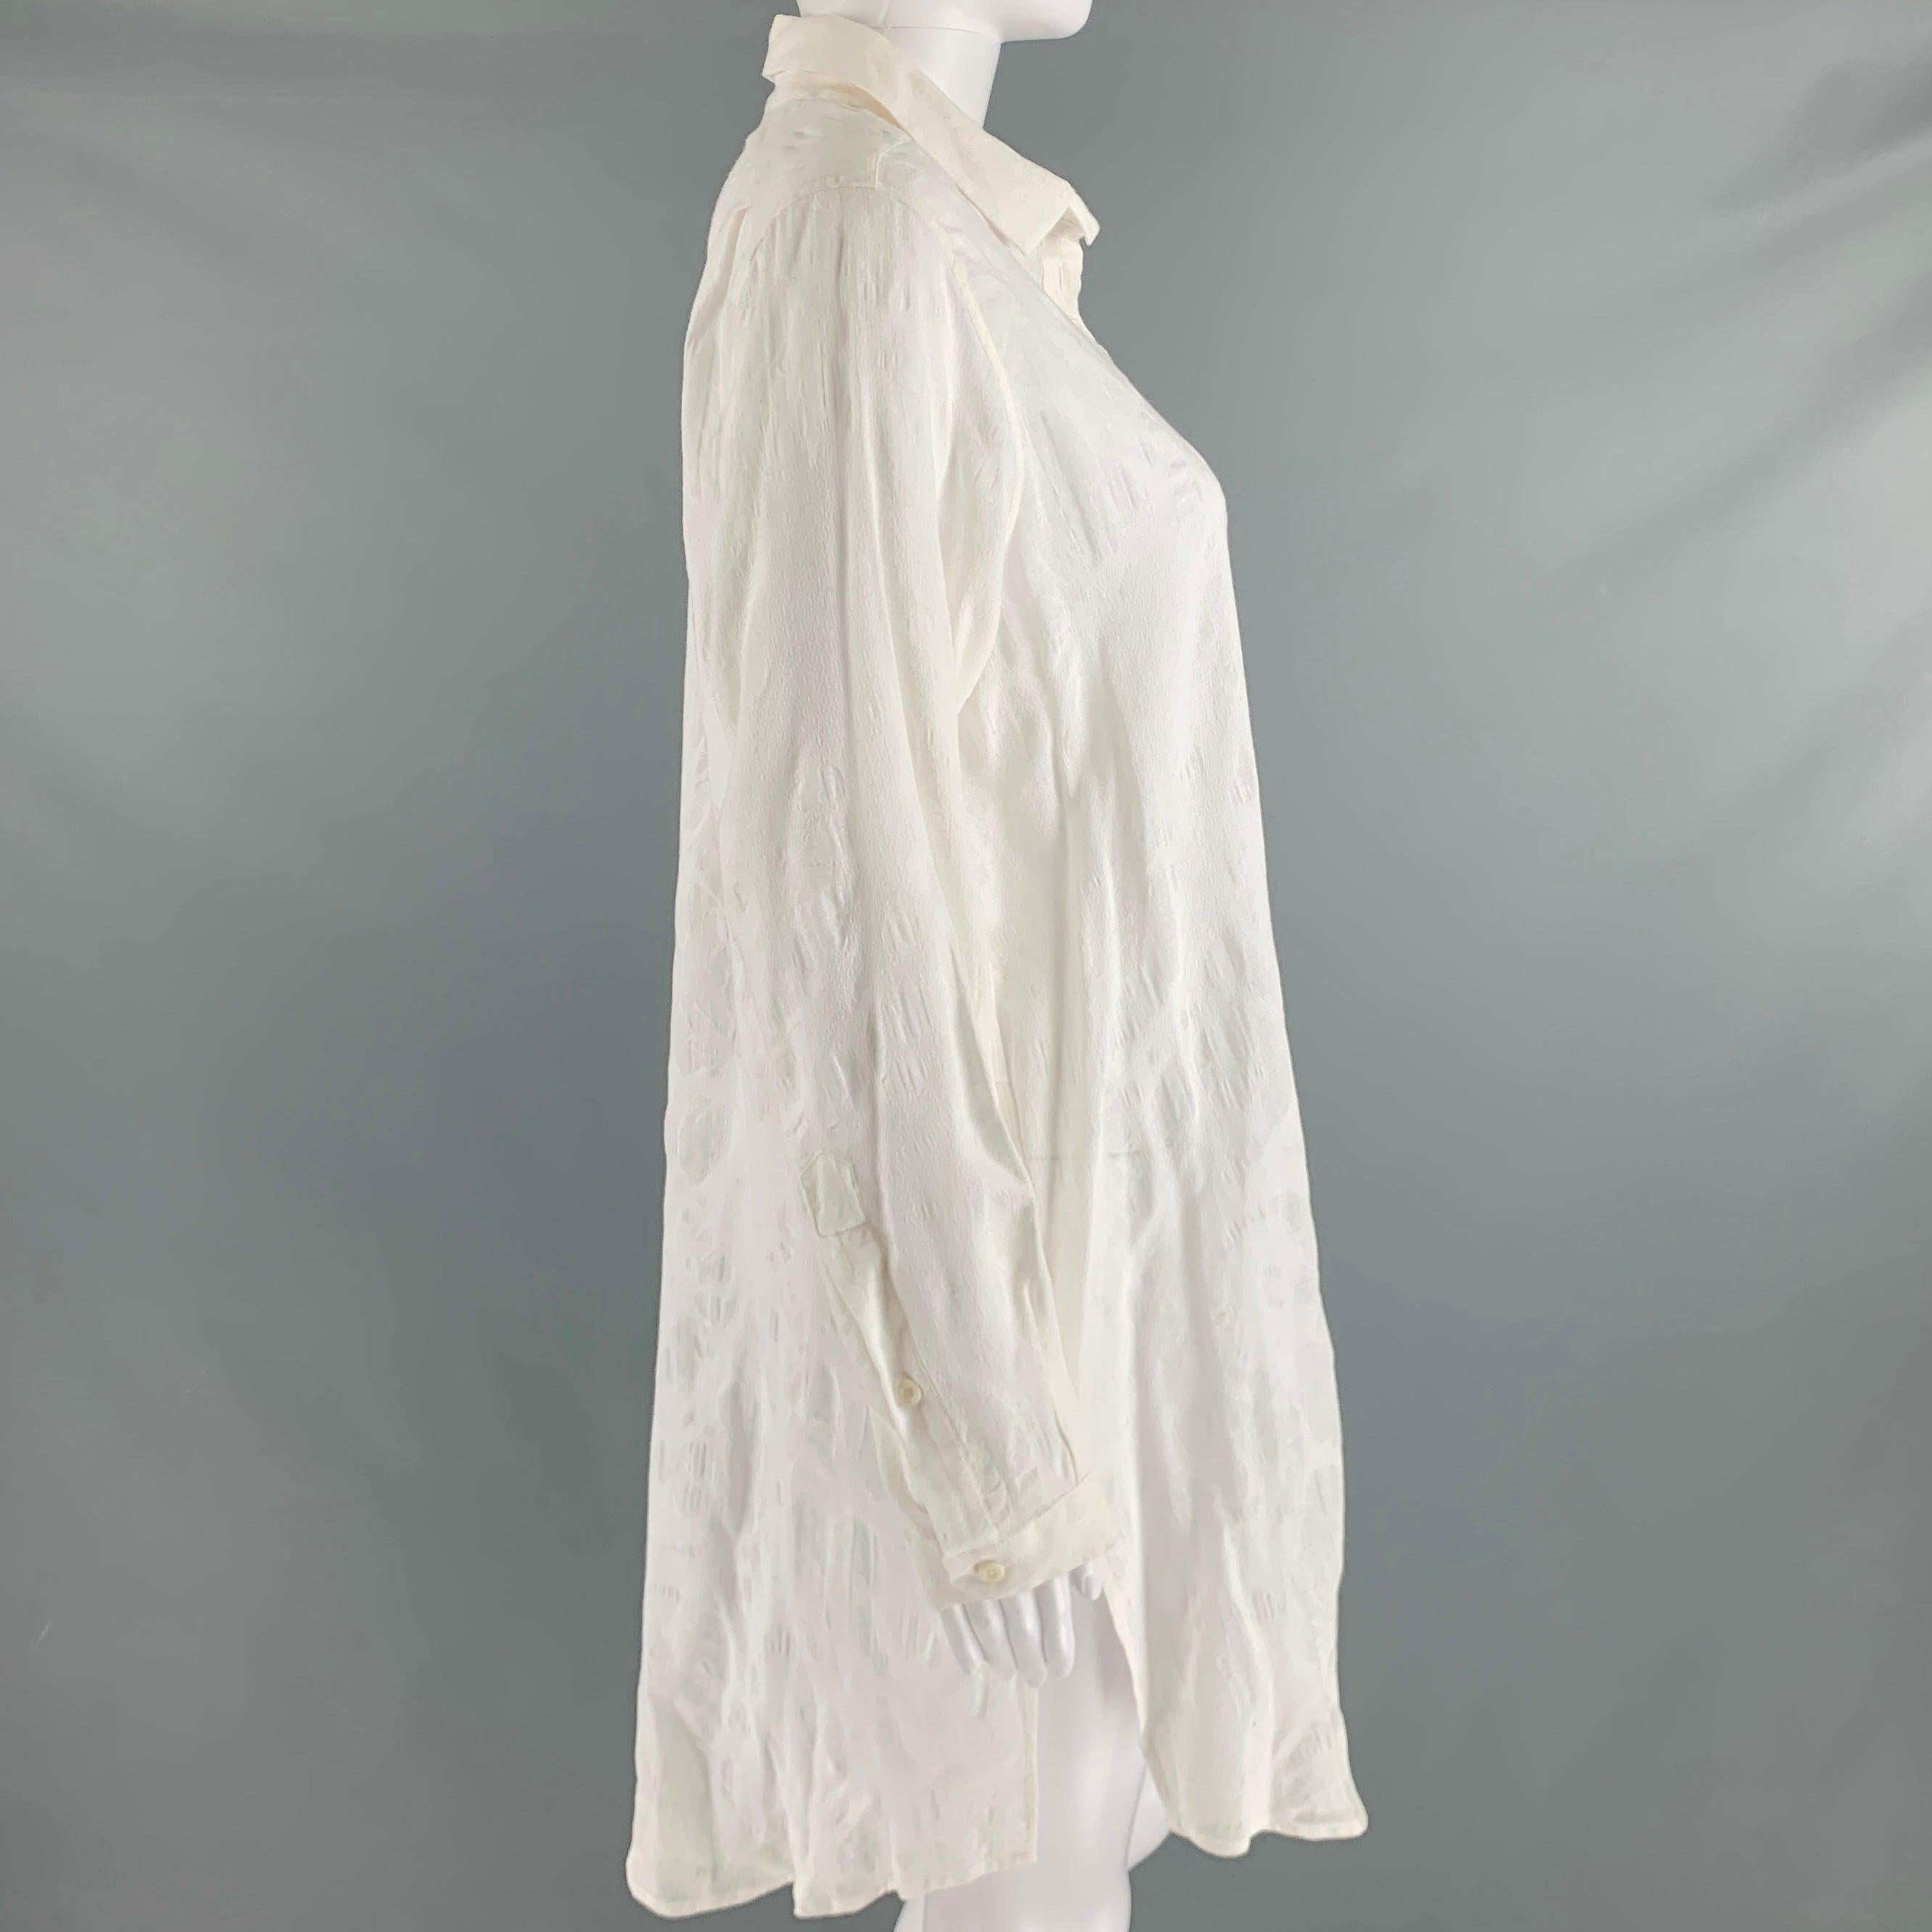 ANN DEMEULEMEESTER Size 6 White Cotton Textured Long Blouse In Good Condition For Sale In San Francisco, CA